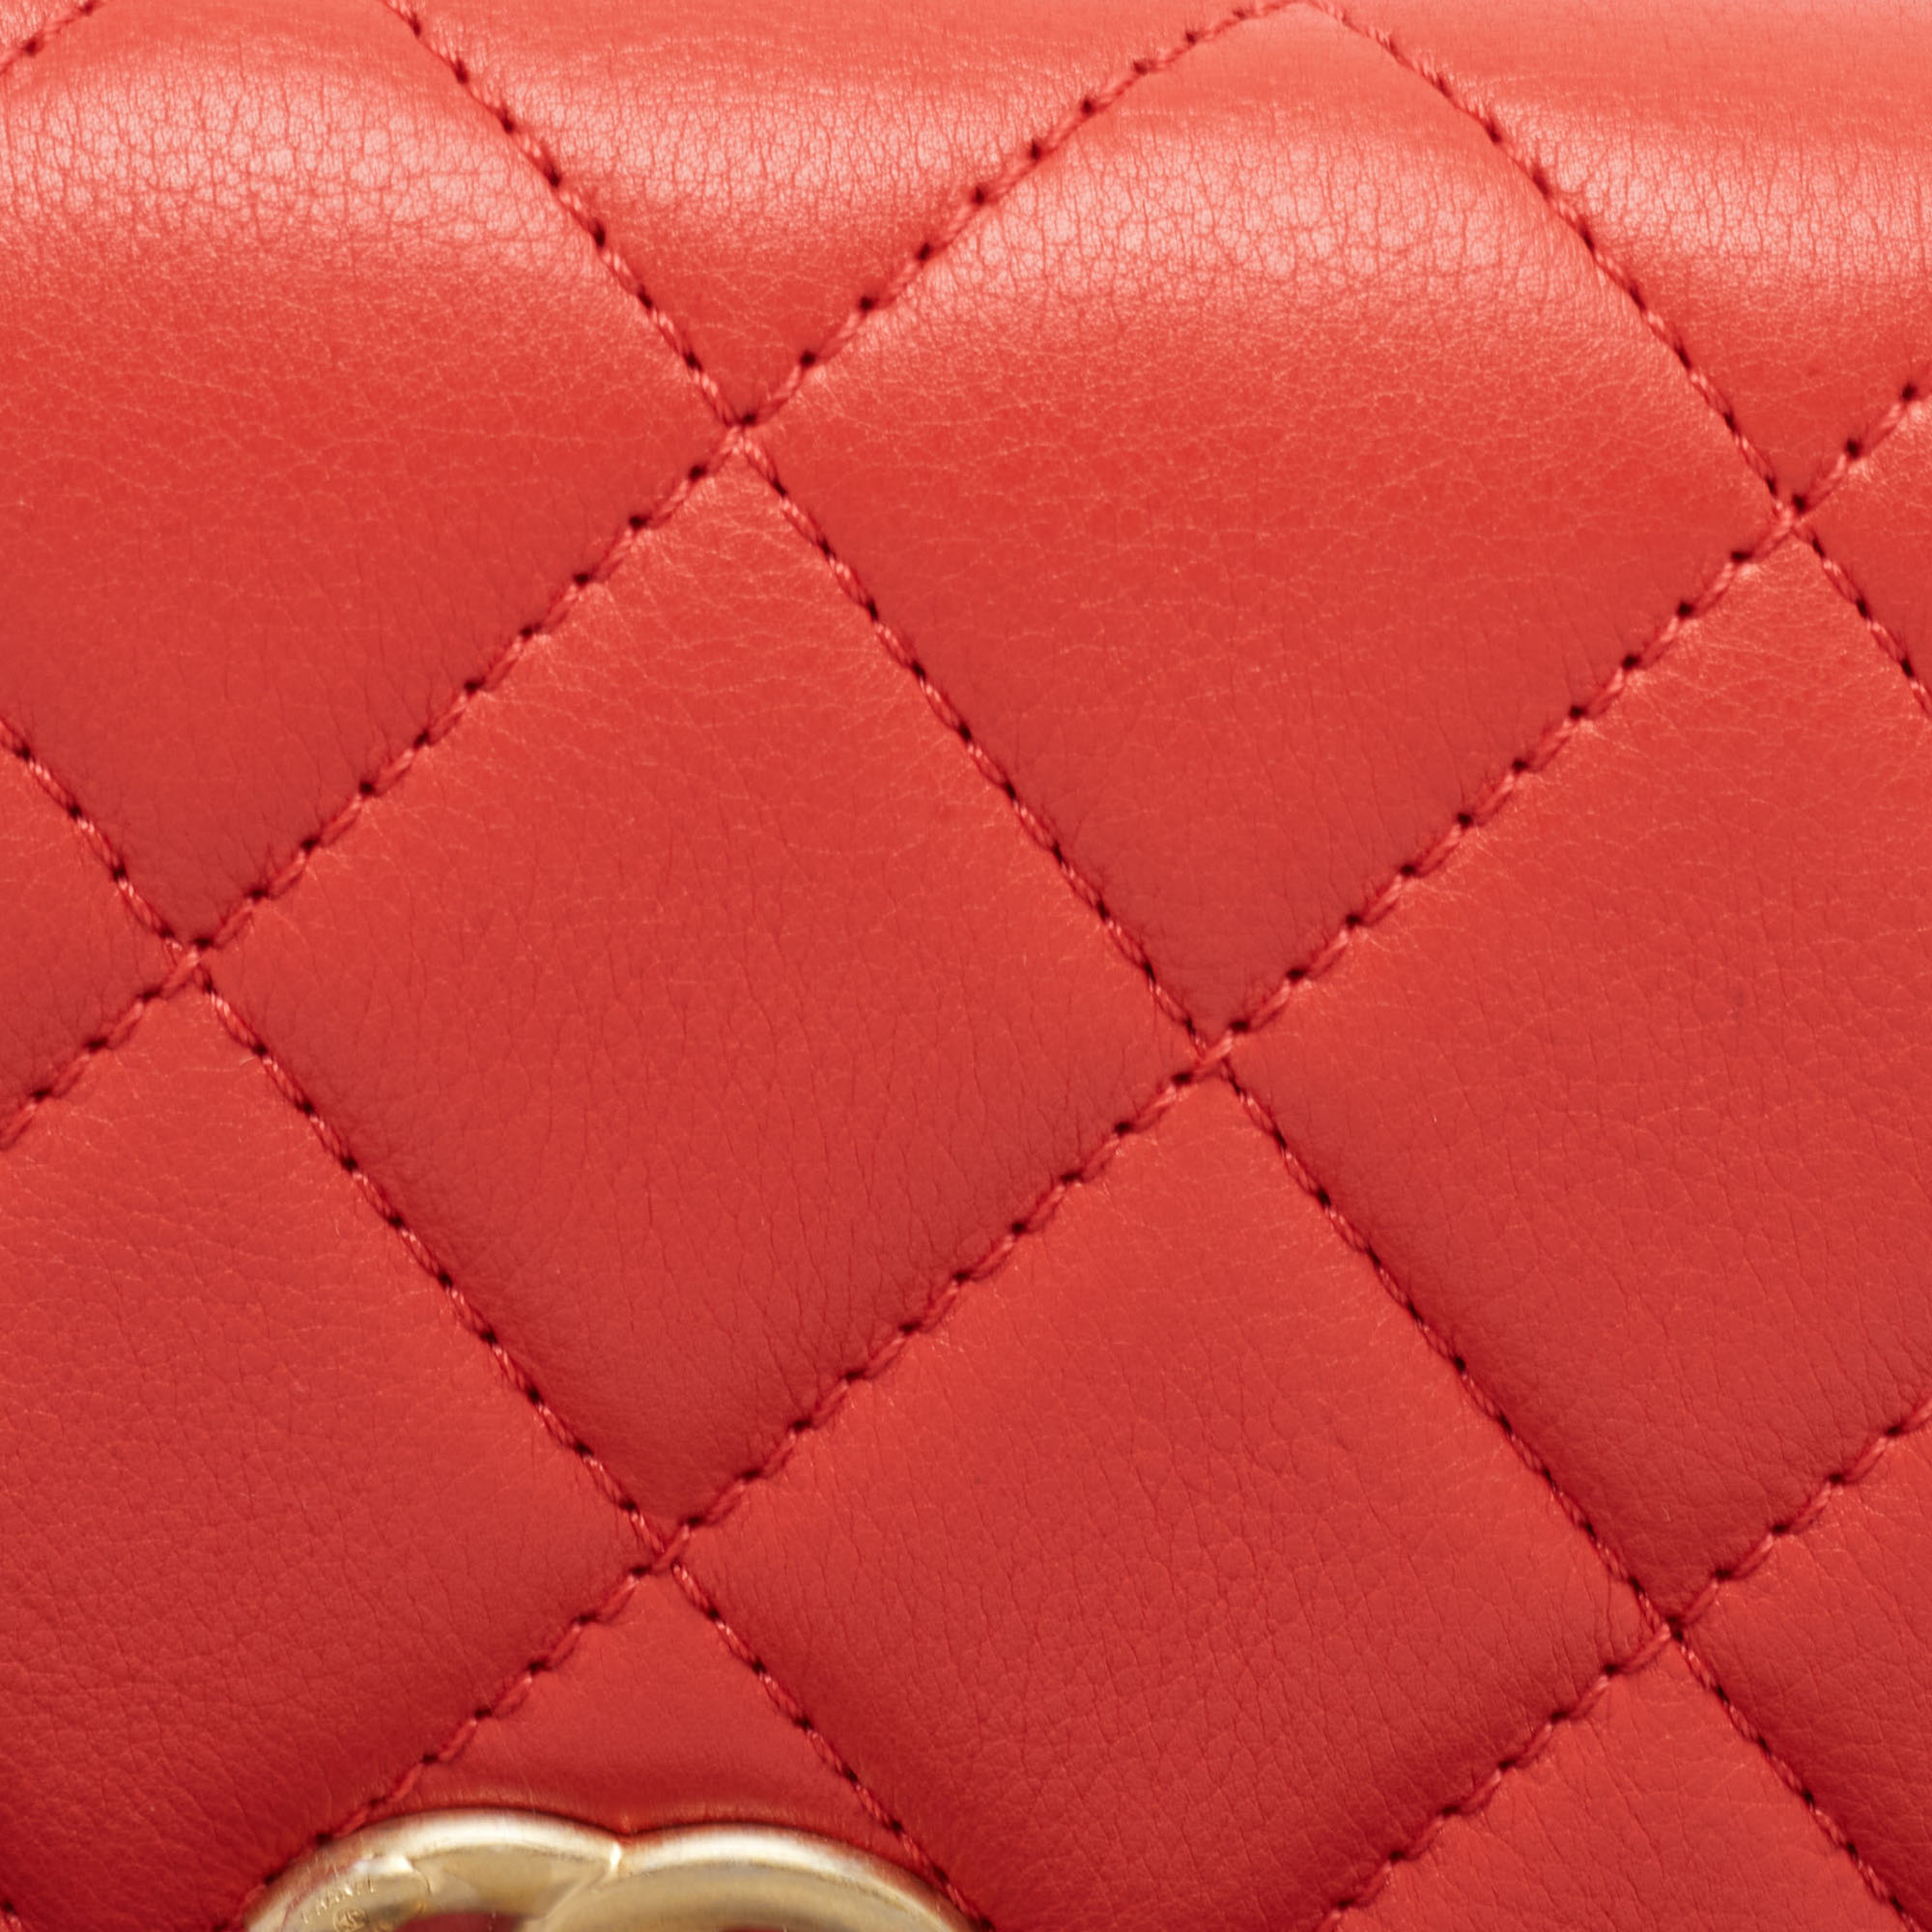 Chanel Red Quilted Leather CC Waist Belt Bag